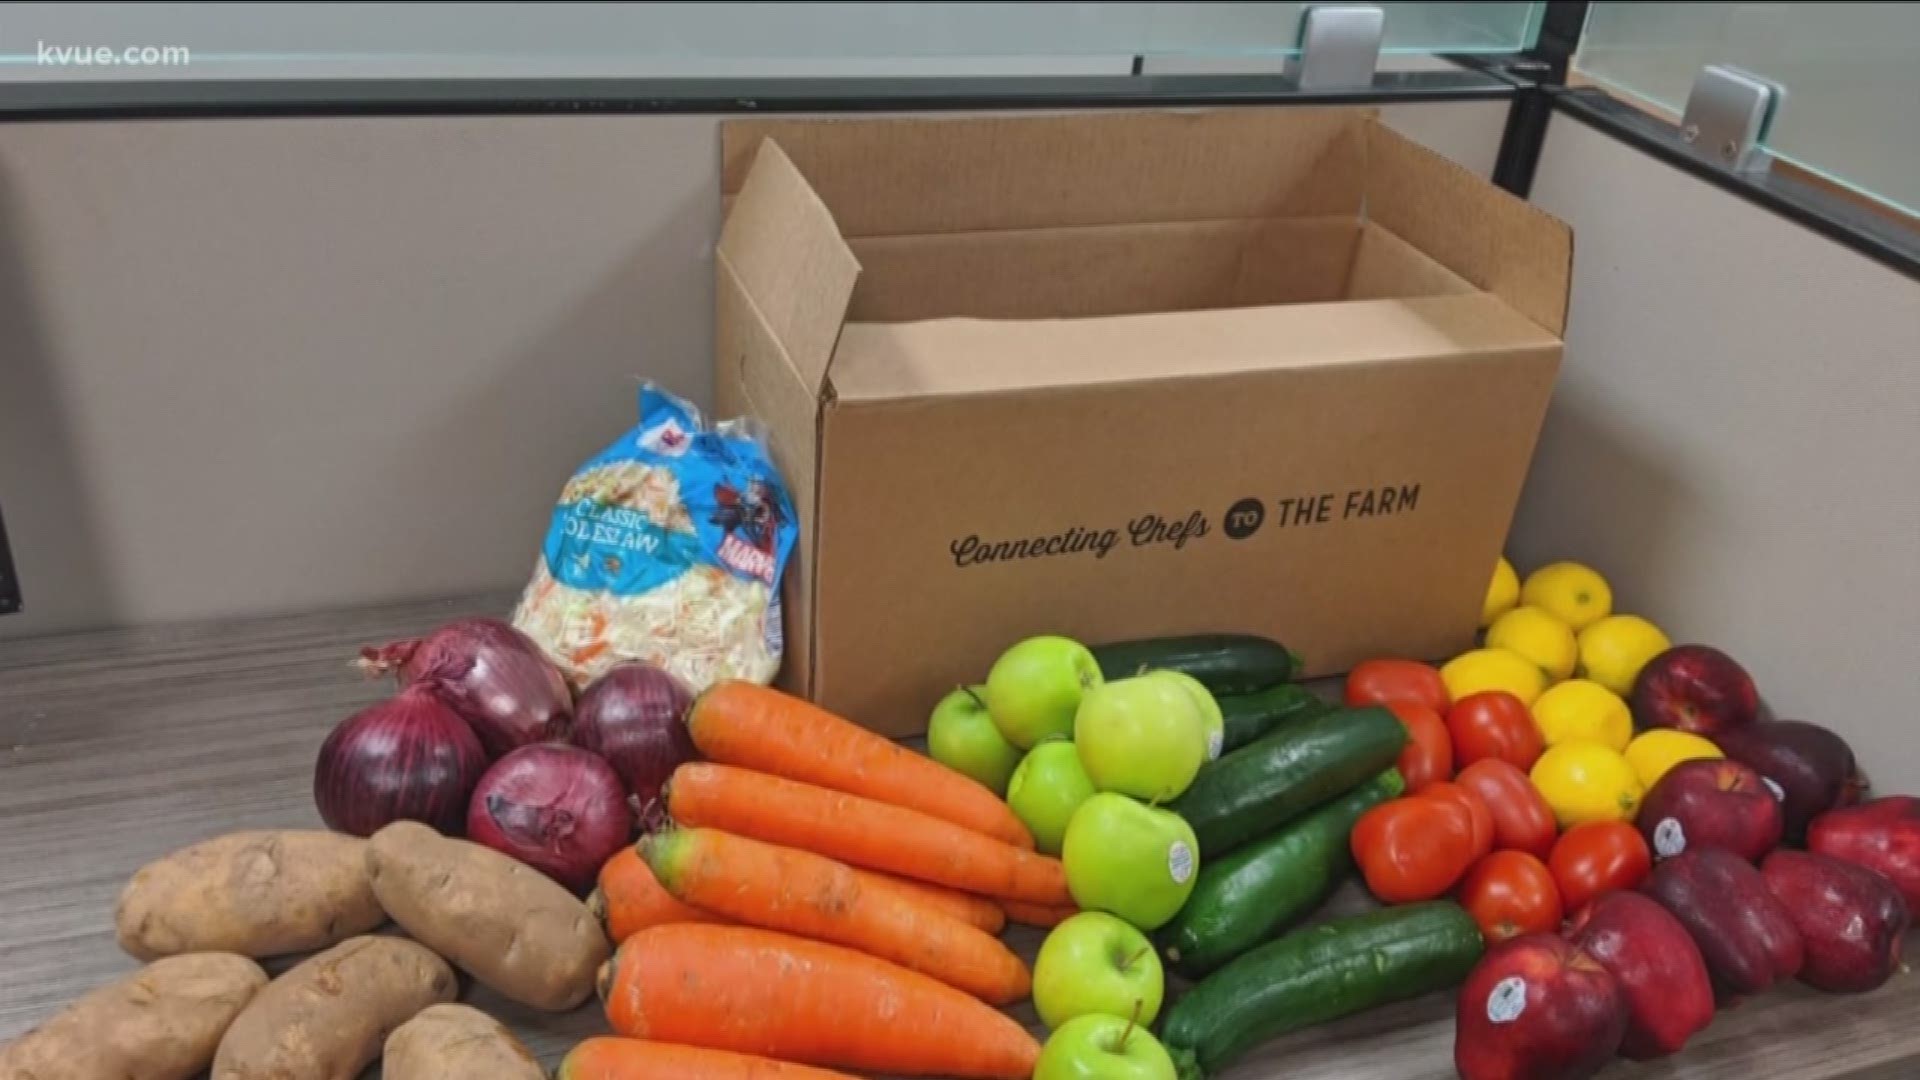 Shoppers are finding ways to avoid lines at grocery stores, especially with produce.